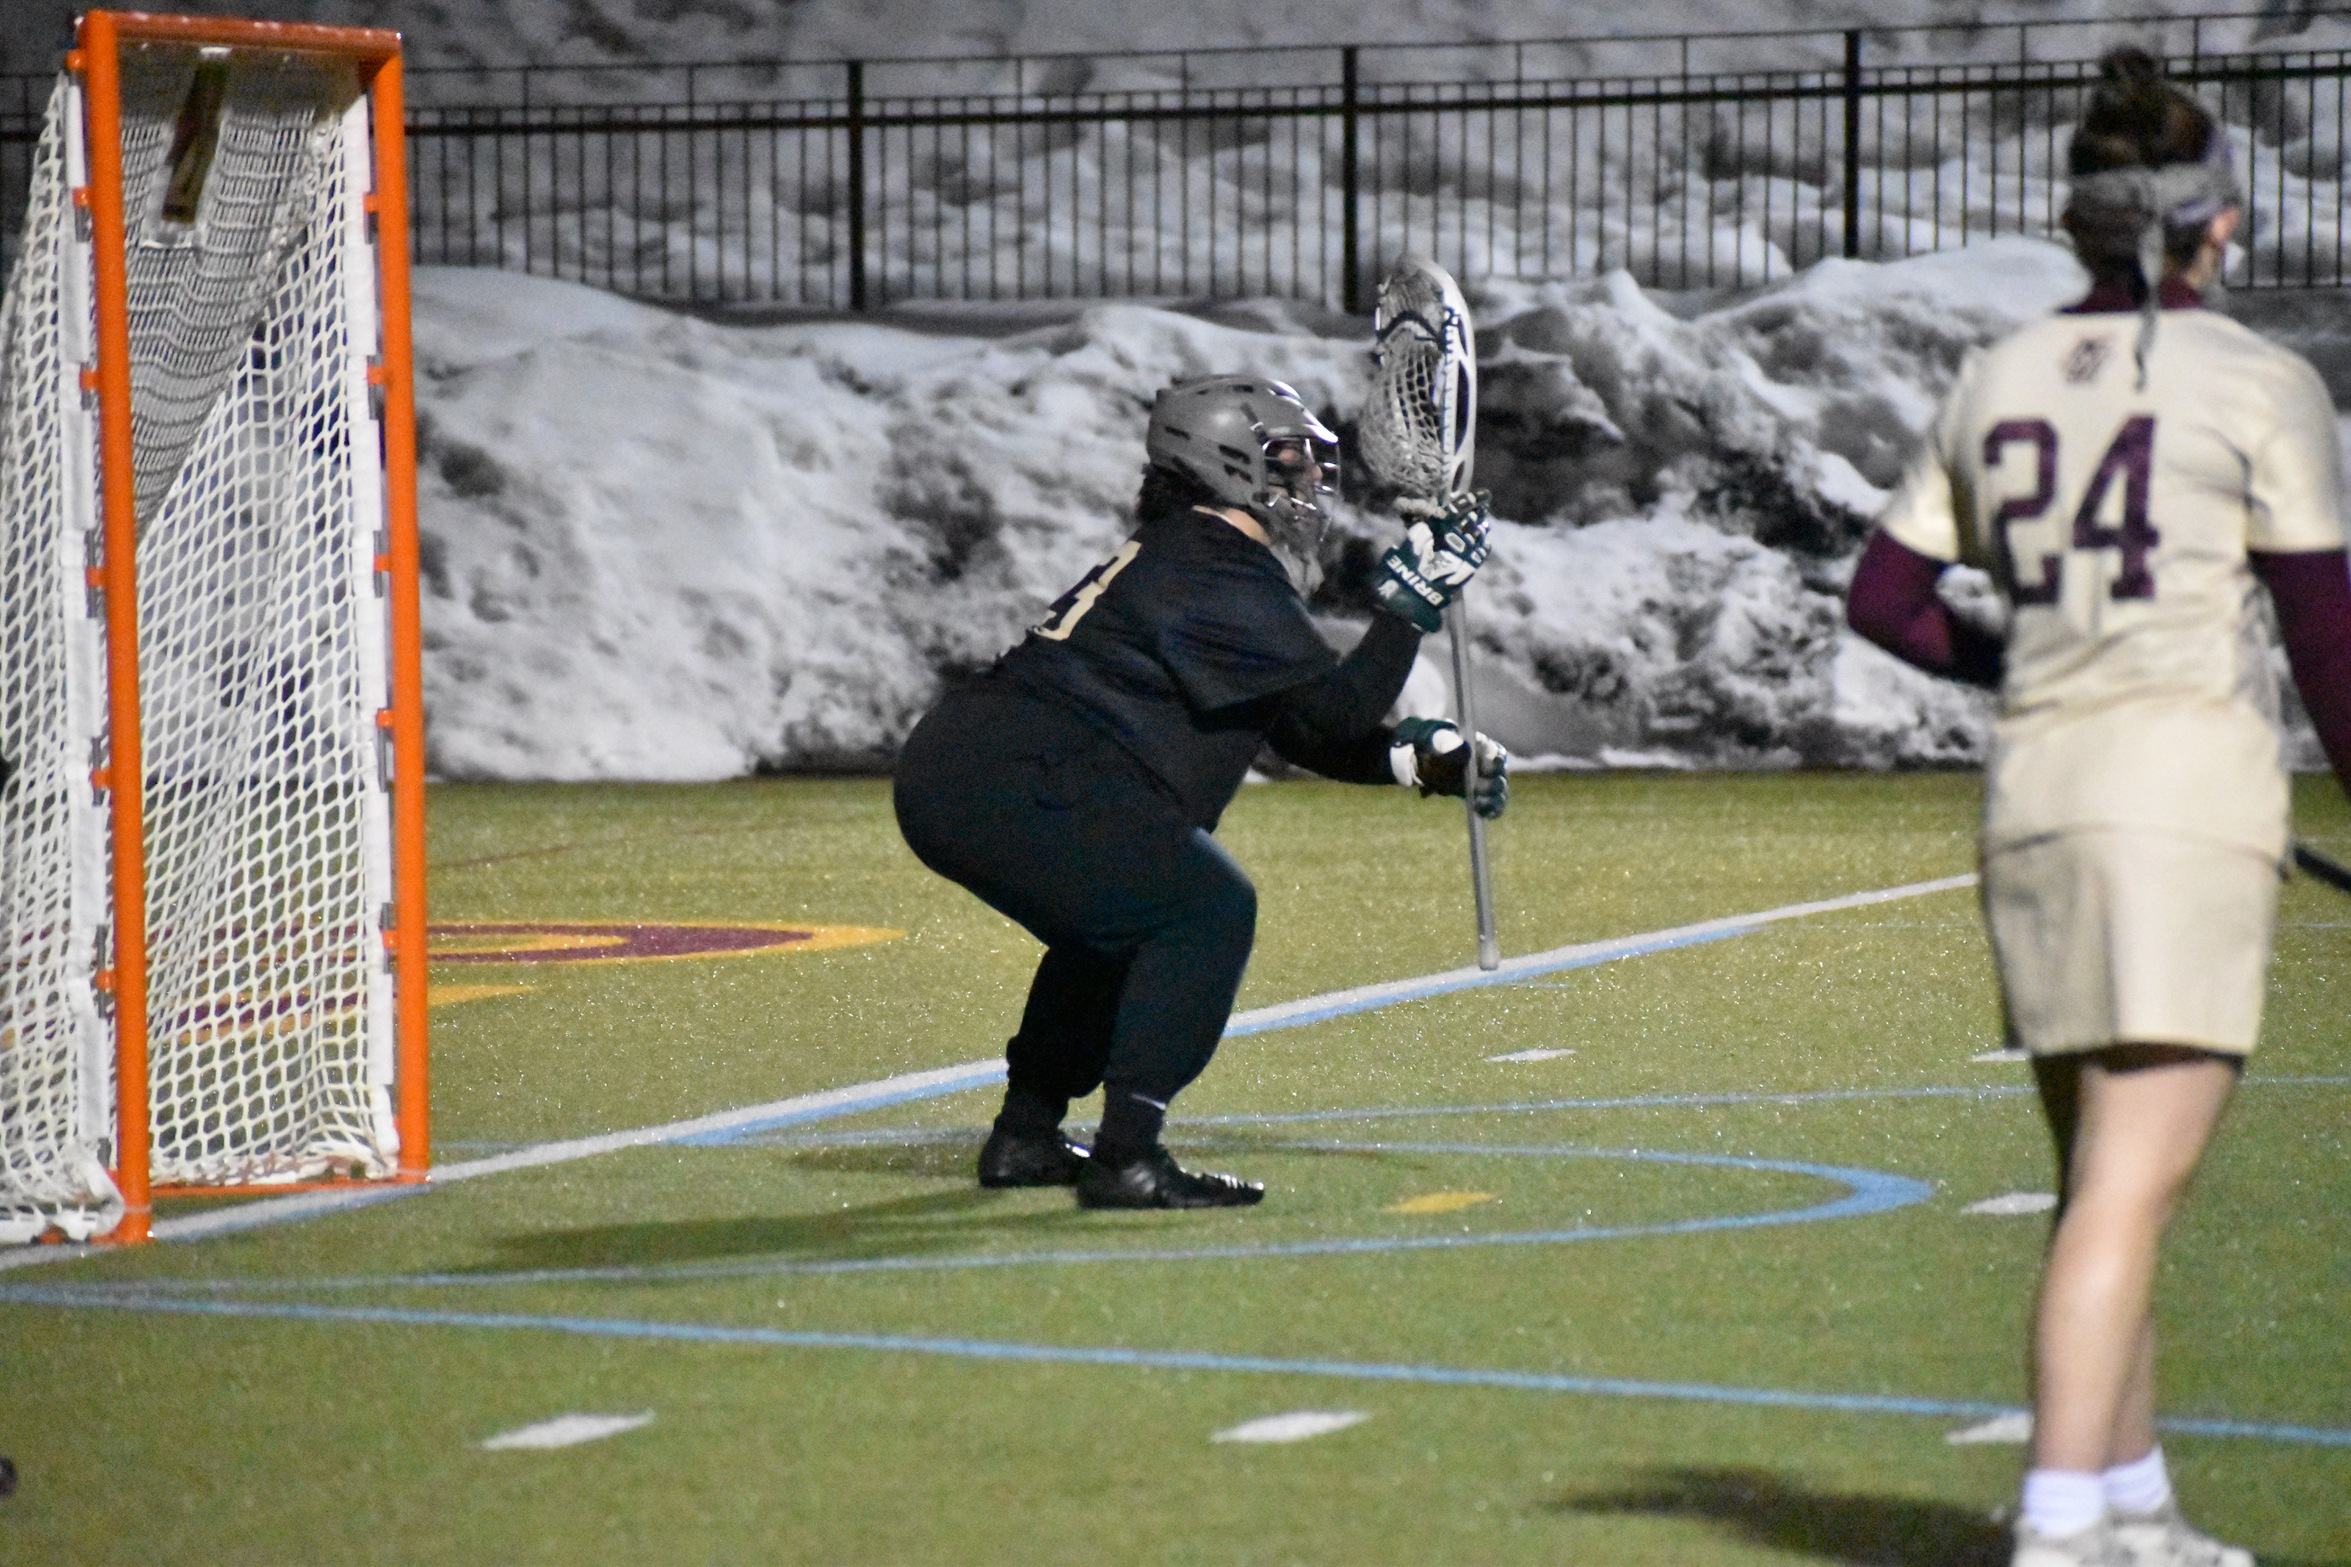 Women's Lacrosse Overpowered Lasers in Conference Play, 20-7